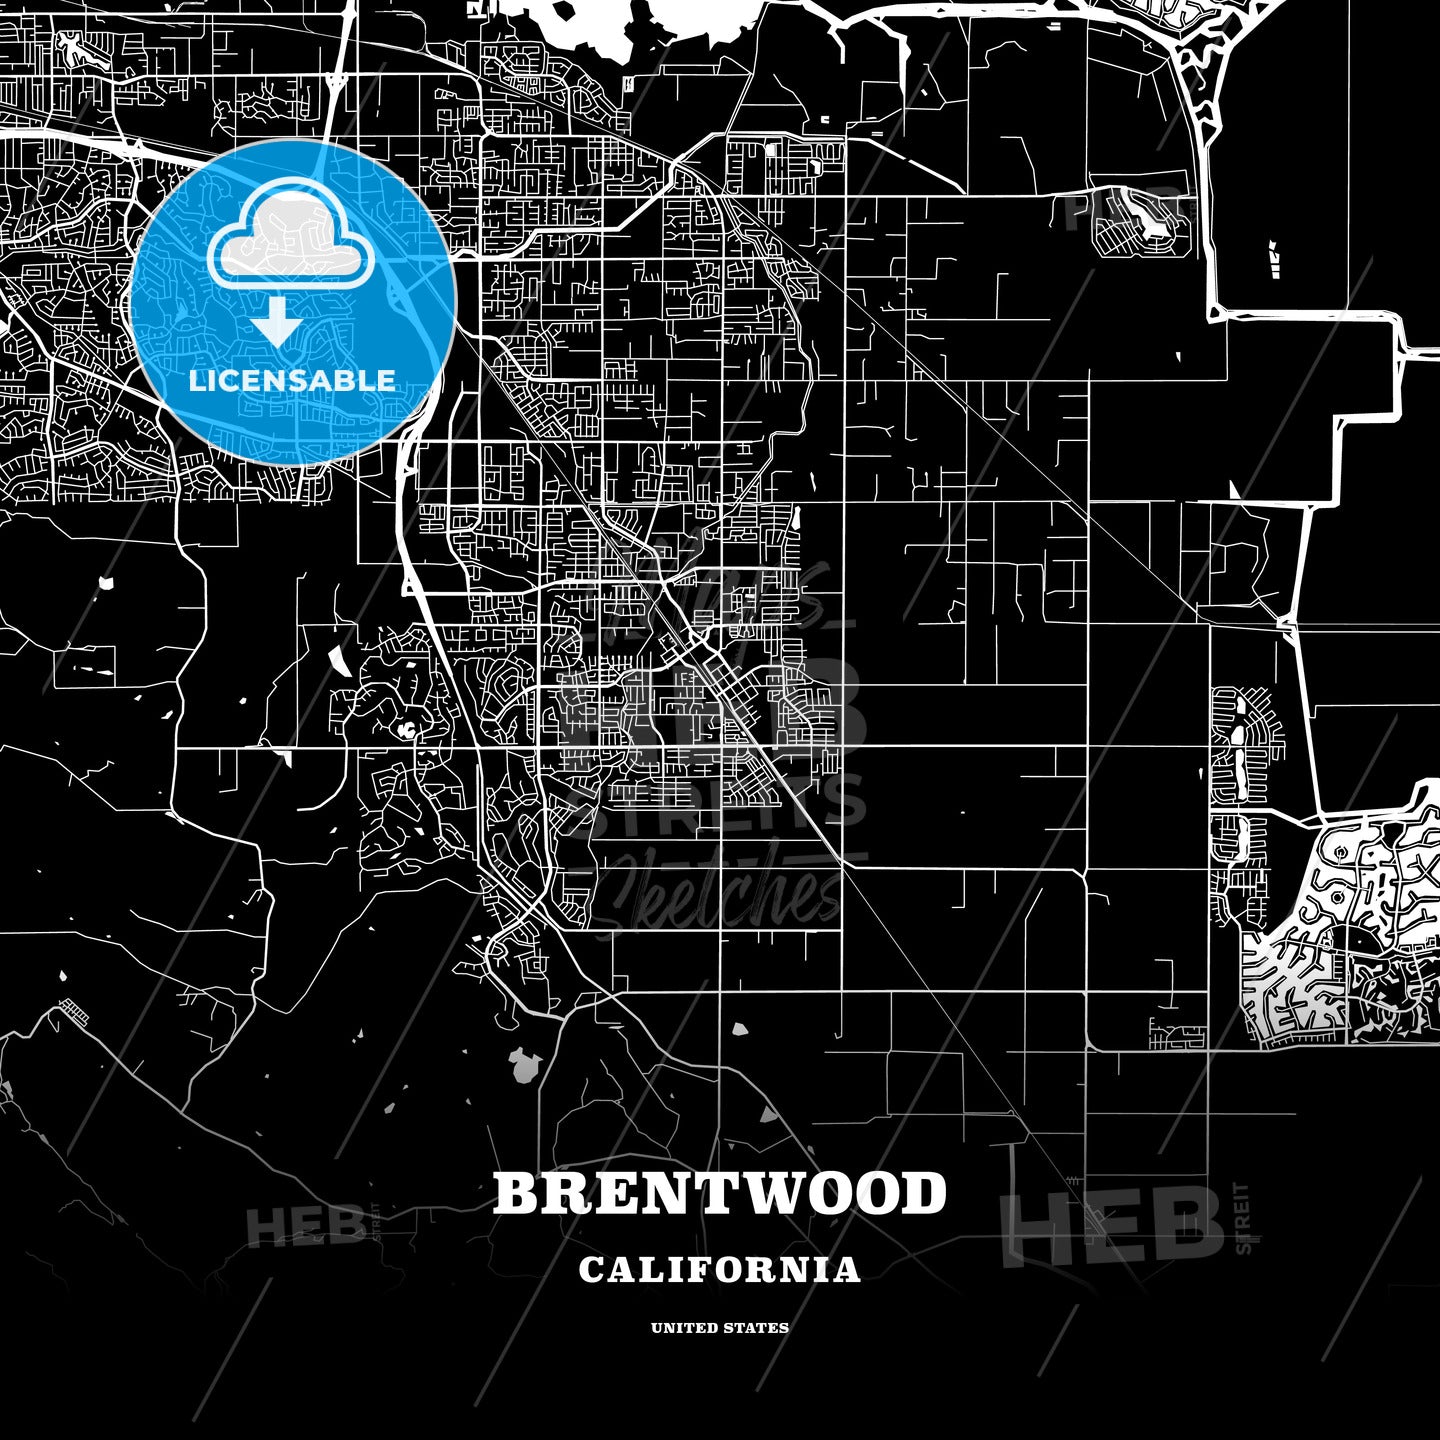 Brentwood, California, USA map